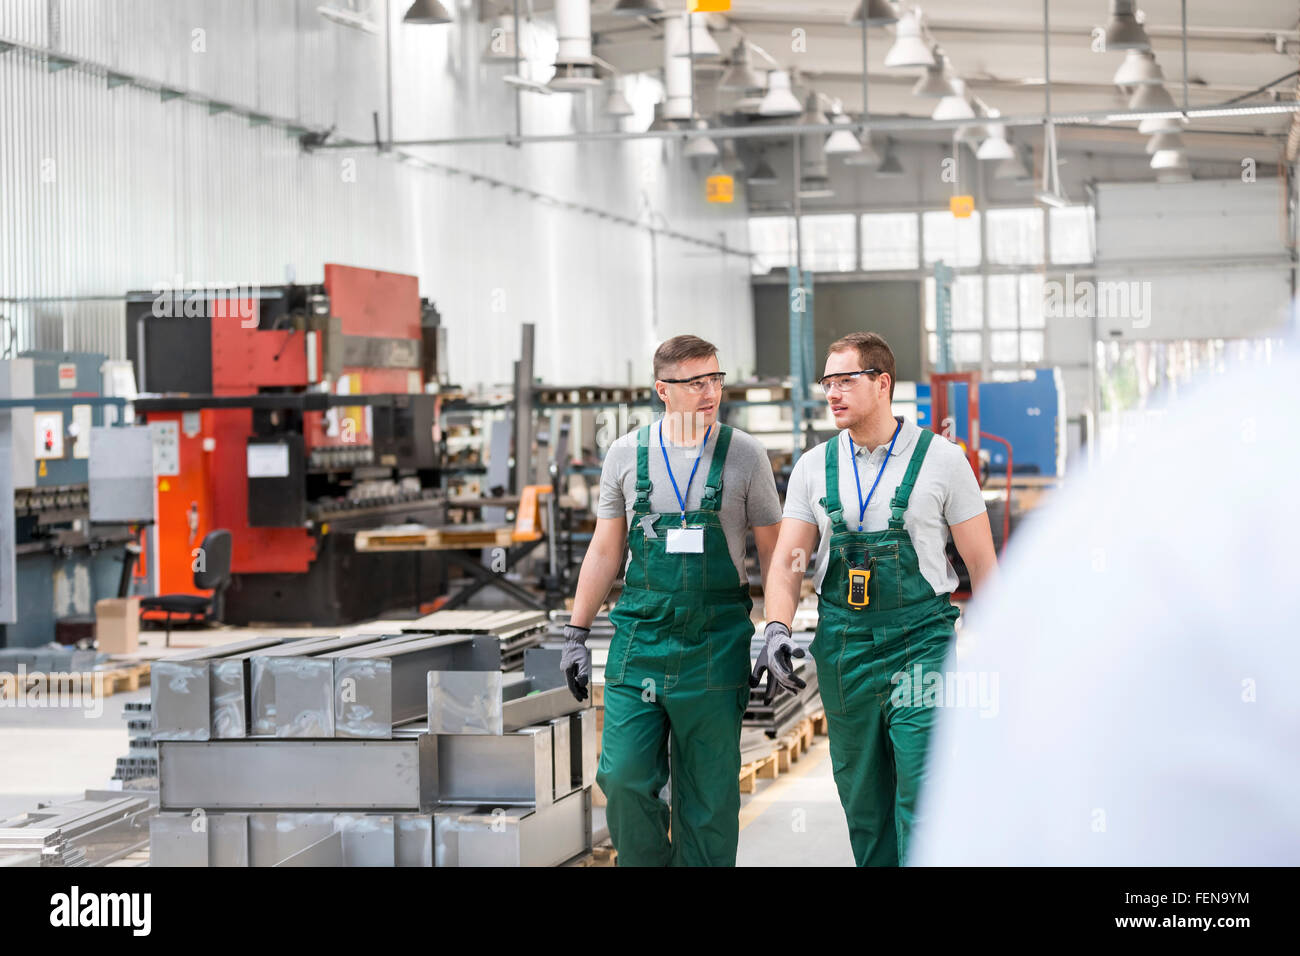 Workers walking and talking in factory Stock Photo